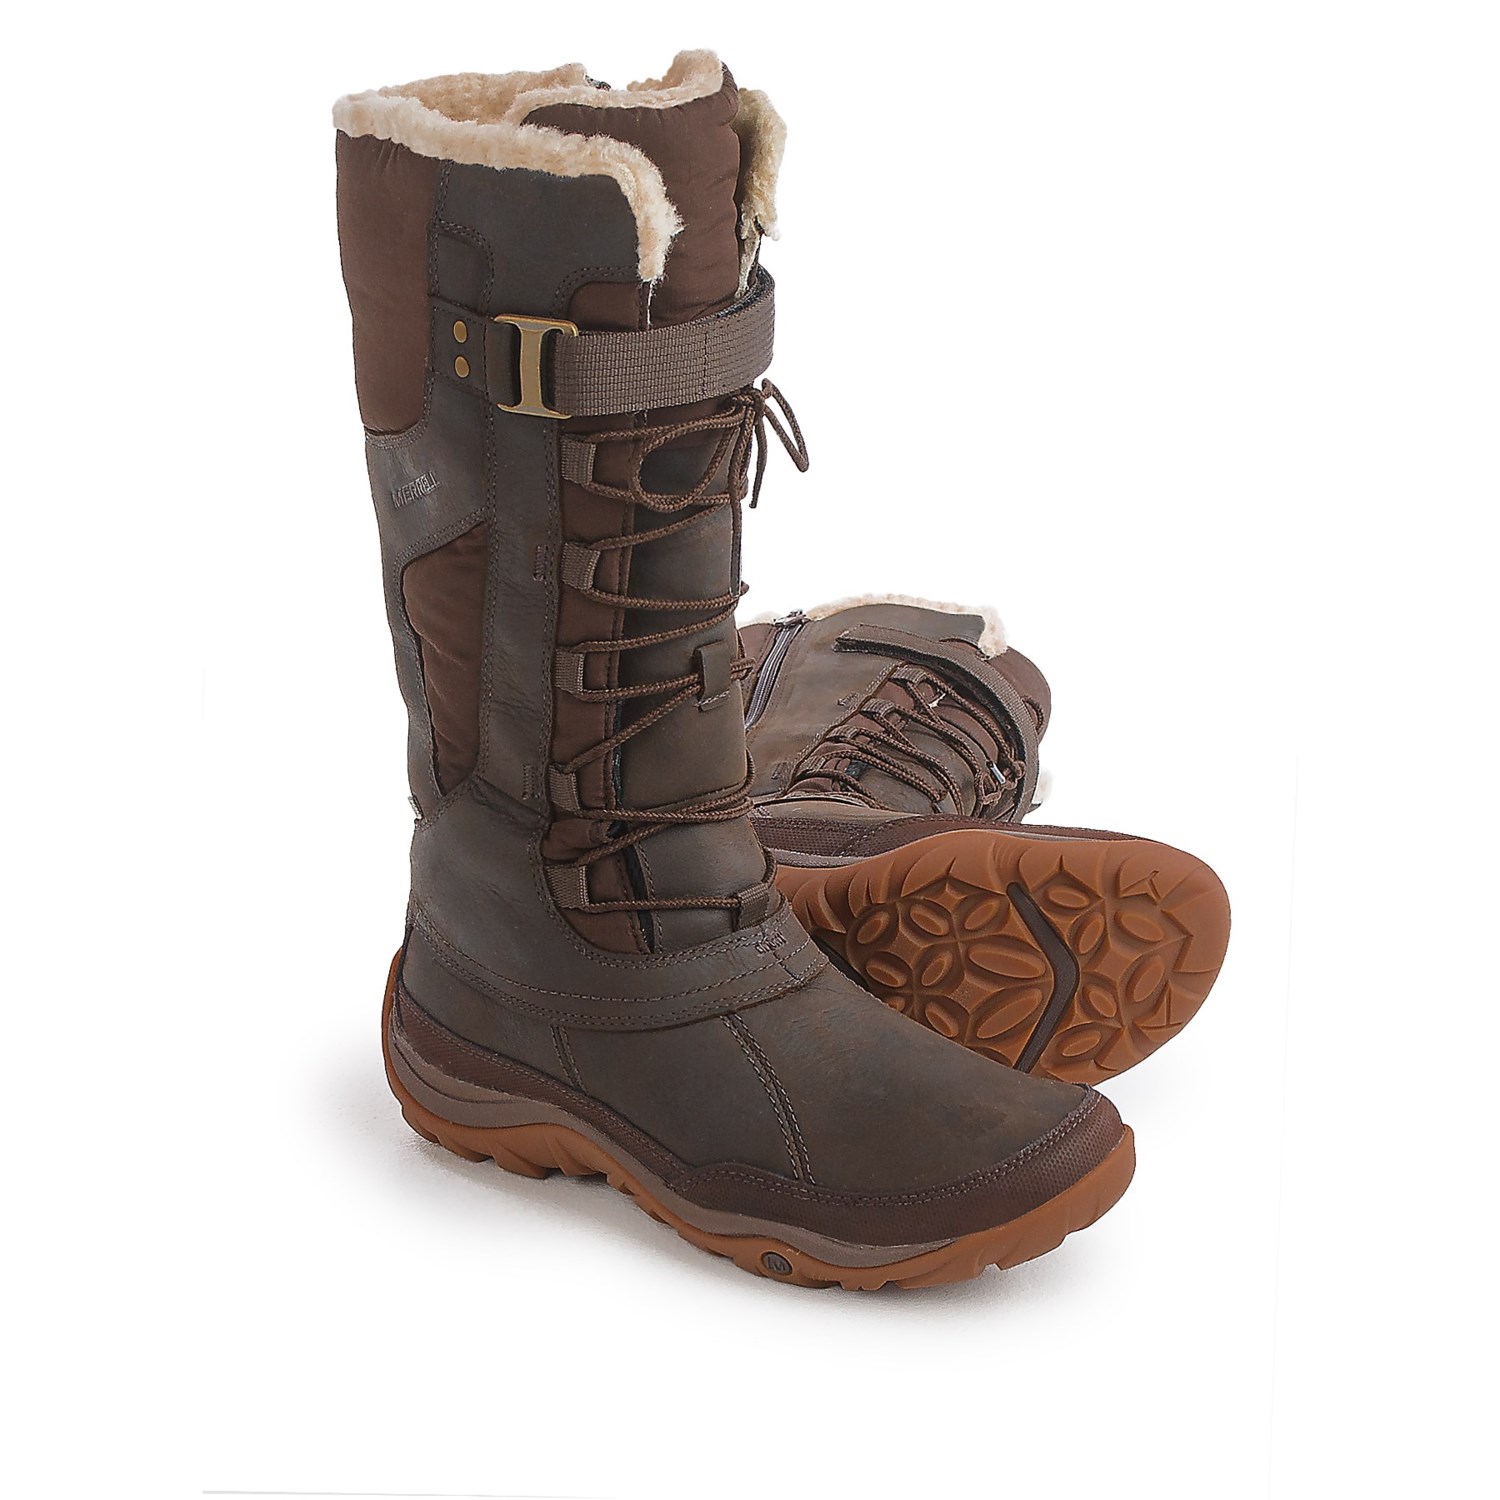 Merrell Murren Tall Leather Snow Boots (For Women) - Save 50%